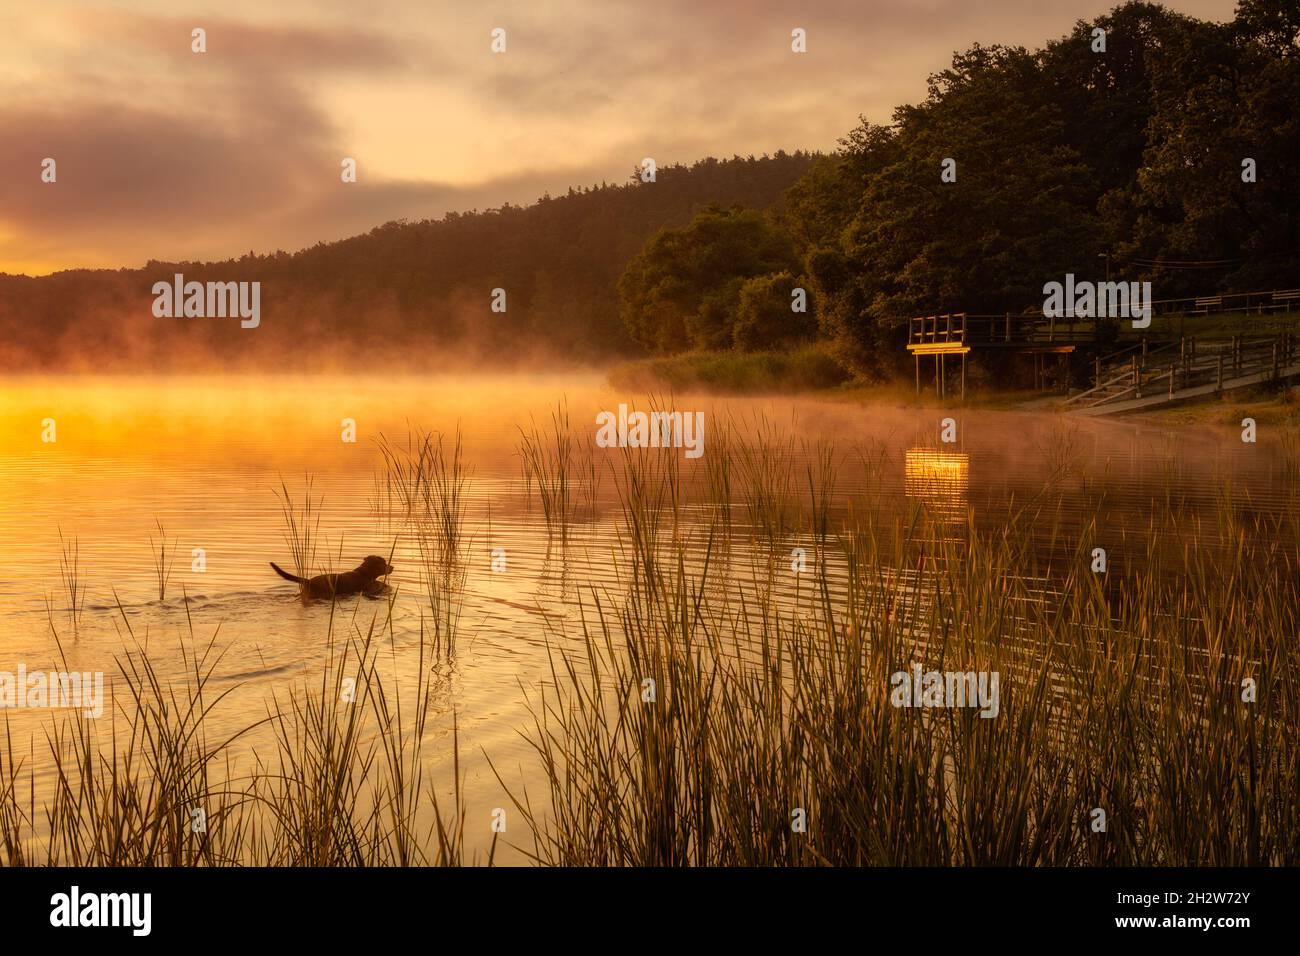 Hunting dog searching for ducks in pond at sunrise Stock Photo